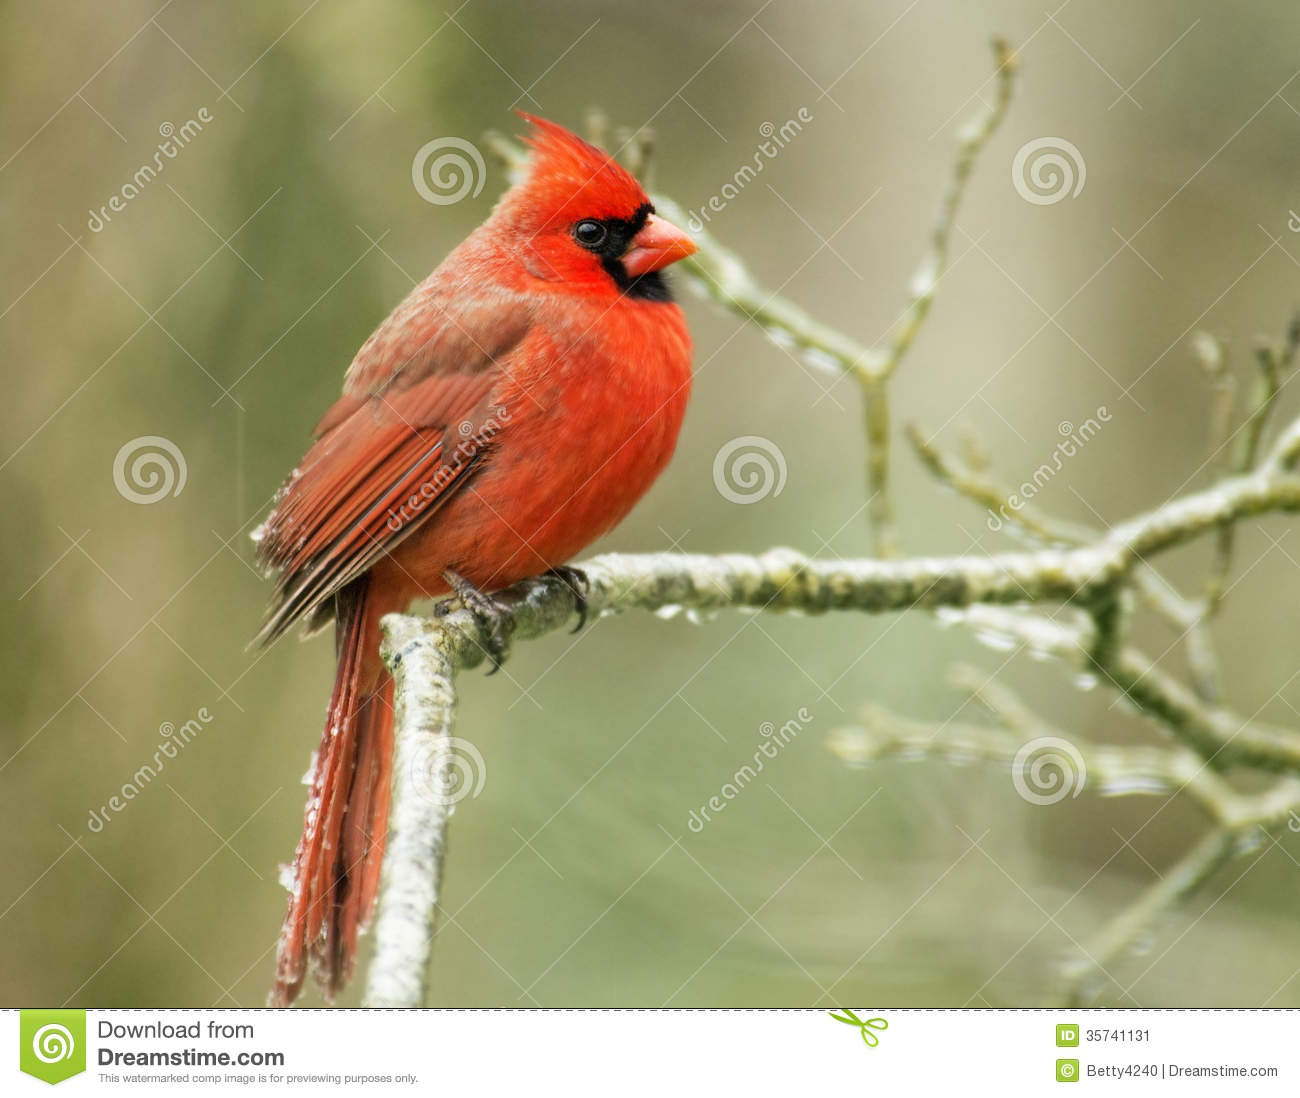 Red Cardinal Has Ice On His Tail Feathers In An Ice Storm  Stock    